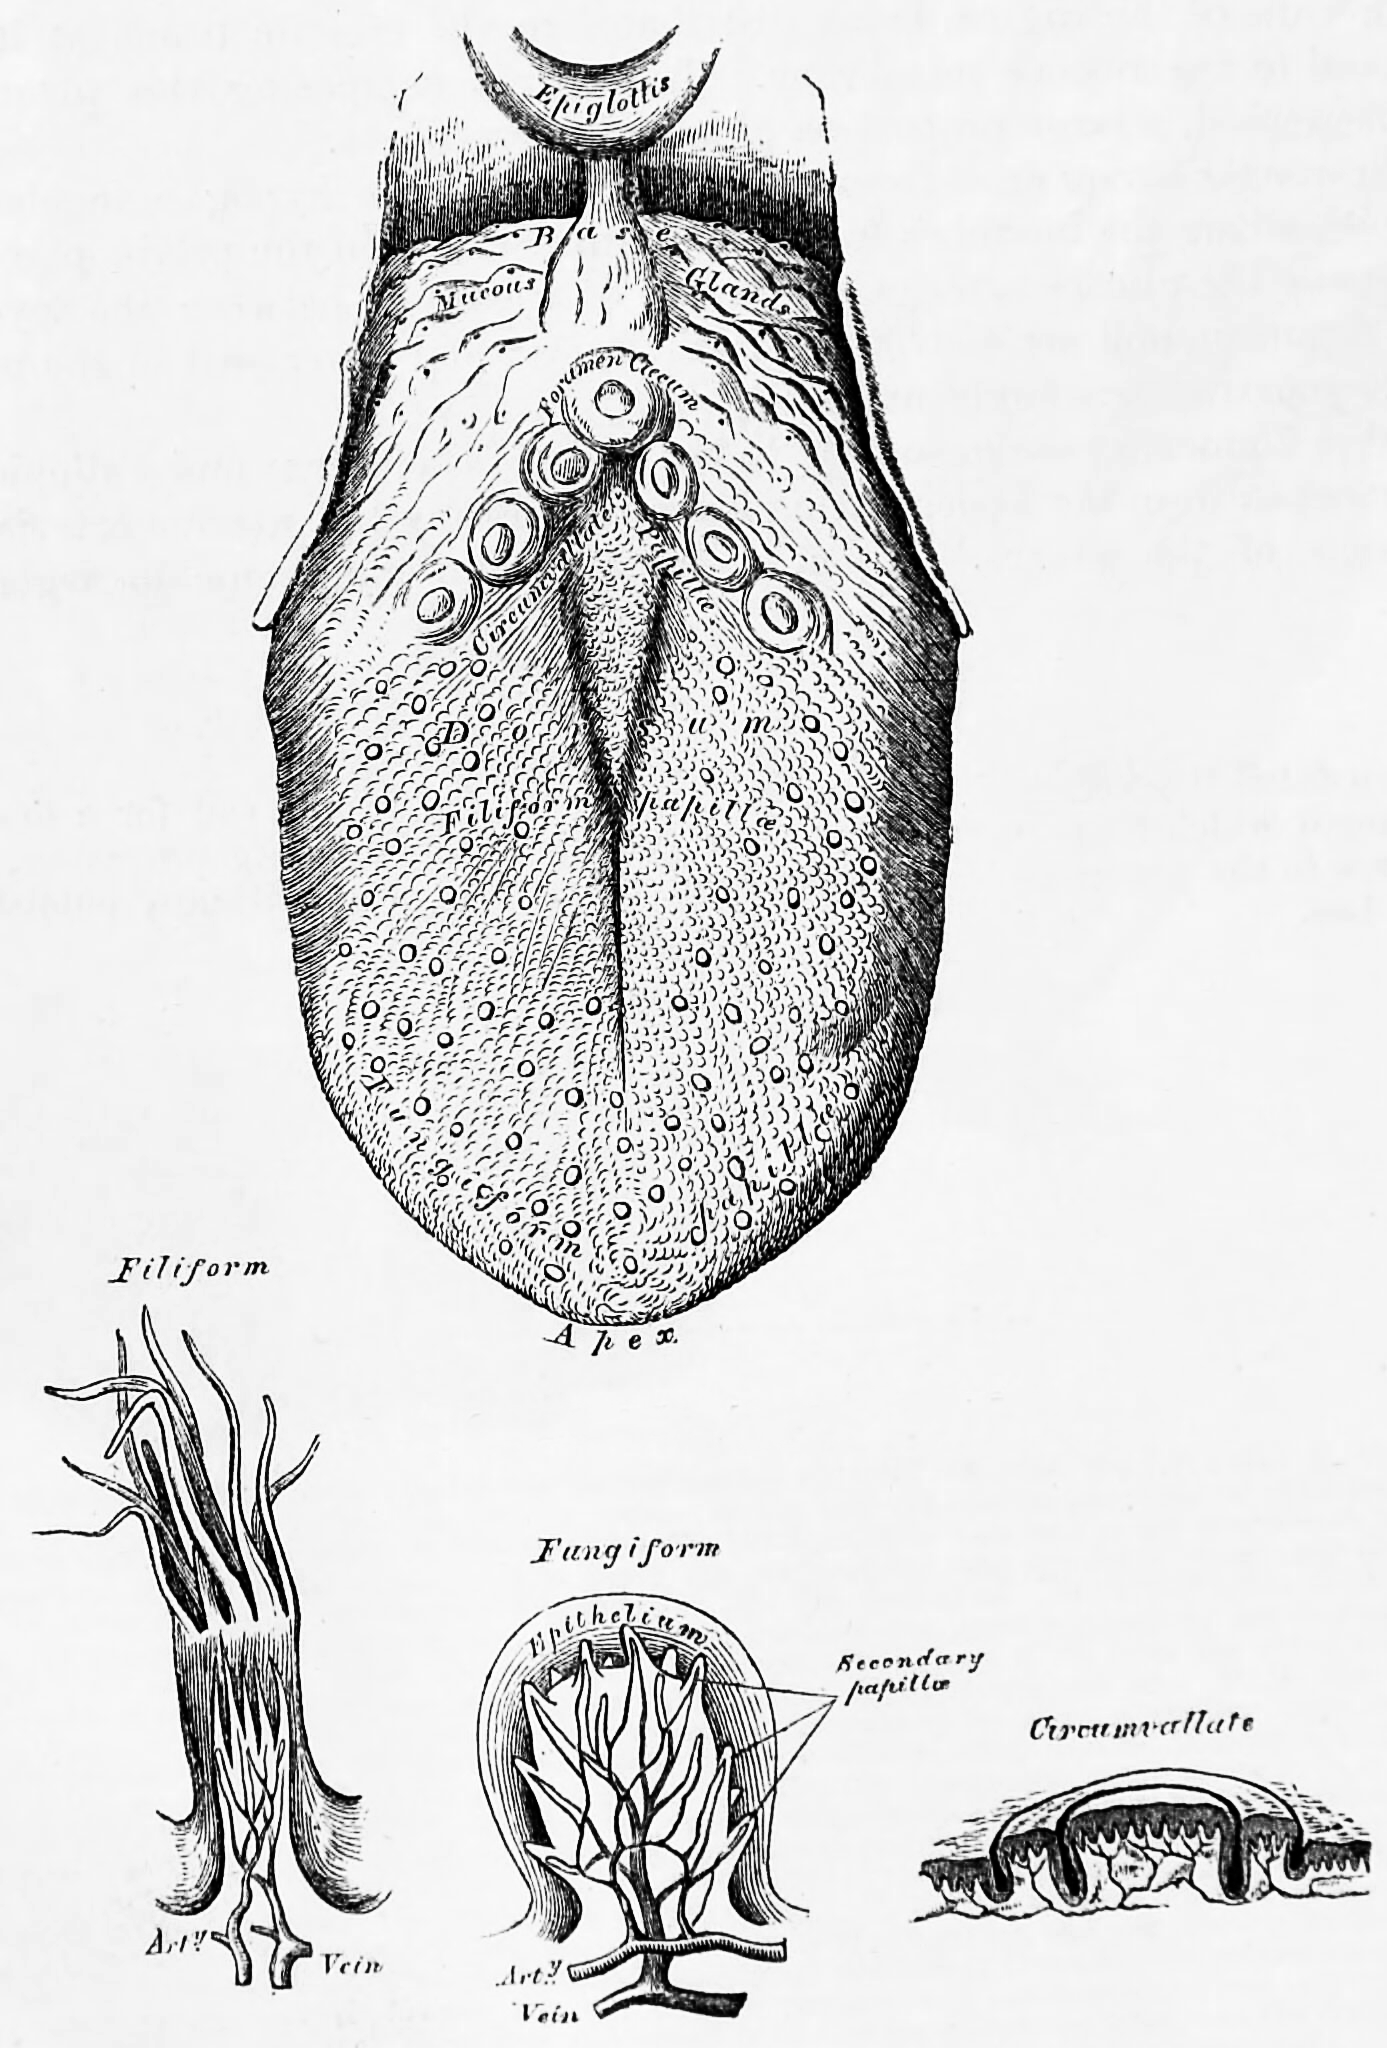 The human tongue and three kinds of papillae magnified. Bottom left to right: filiform, fungiform and circumvallate papillae. From Gray, Henry: Anatomy Descriptive And Surgical. 7th Edition, Longmans, Green, And Co., London, 1875